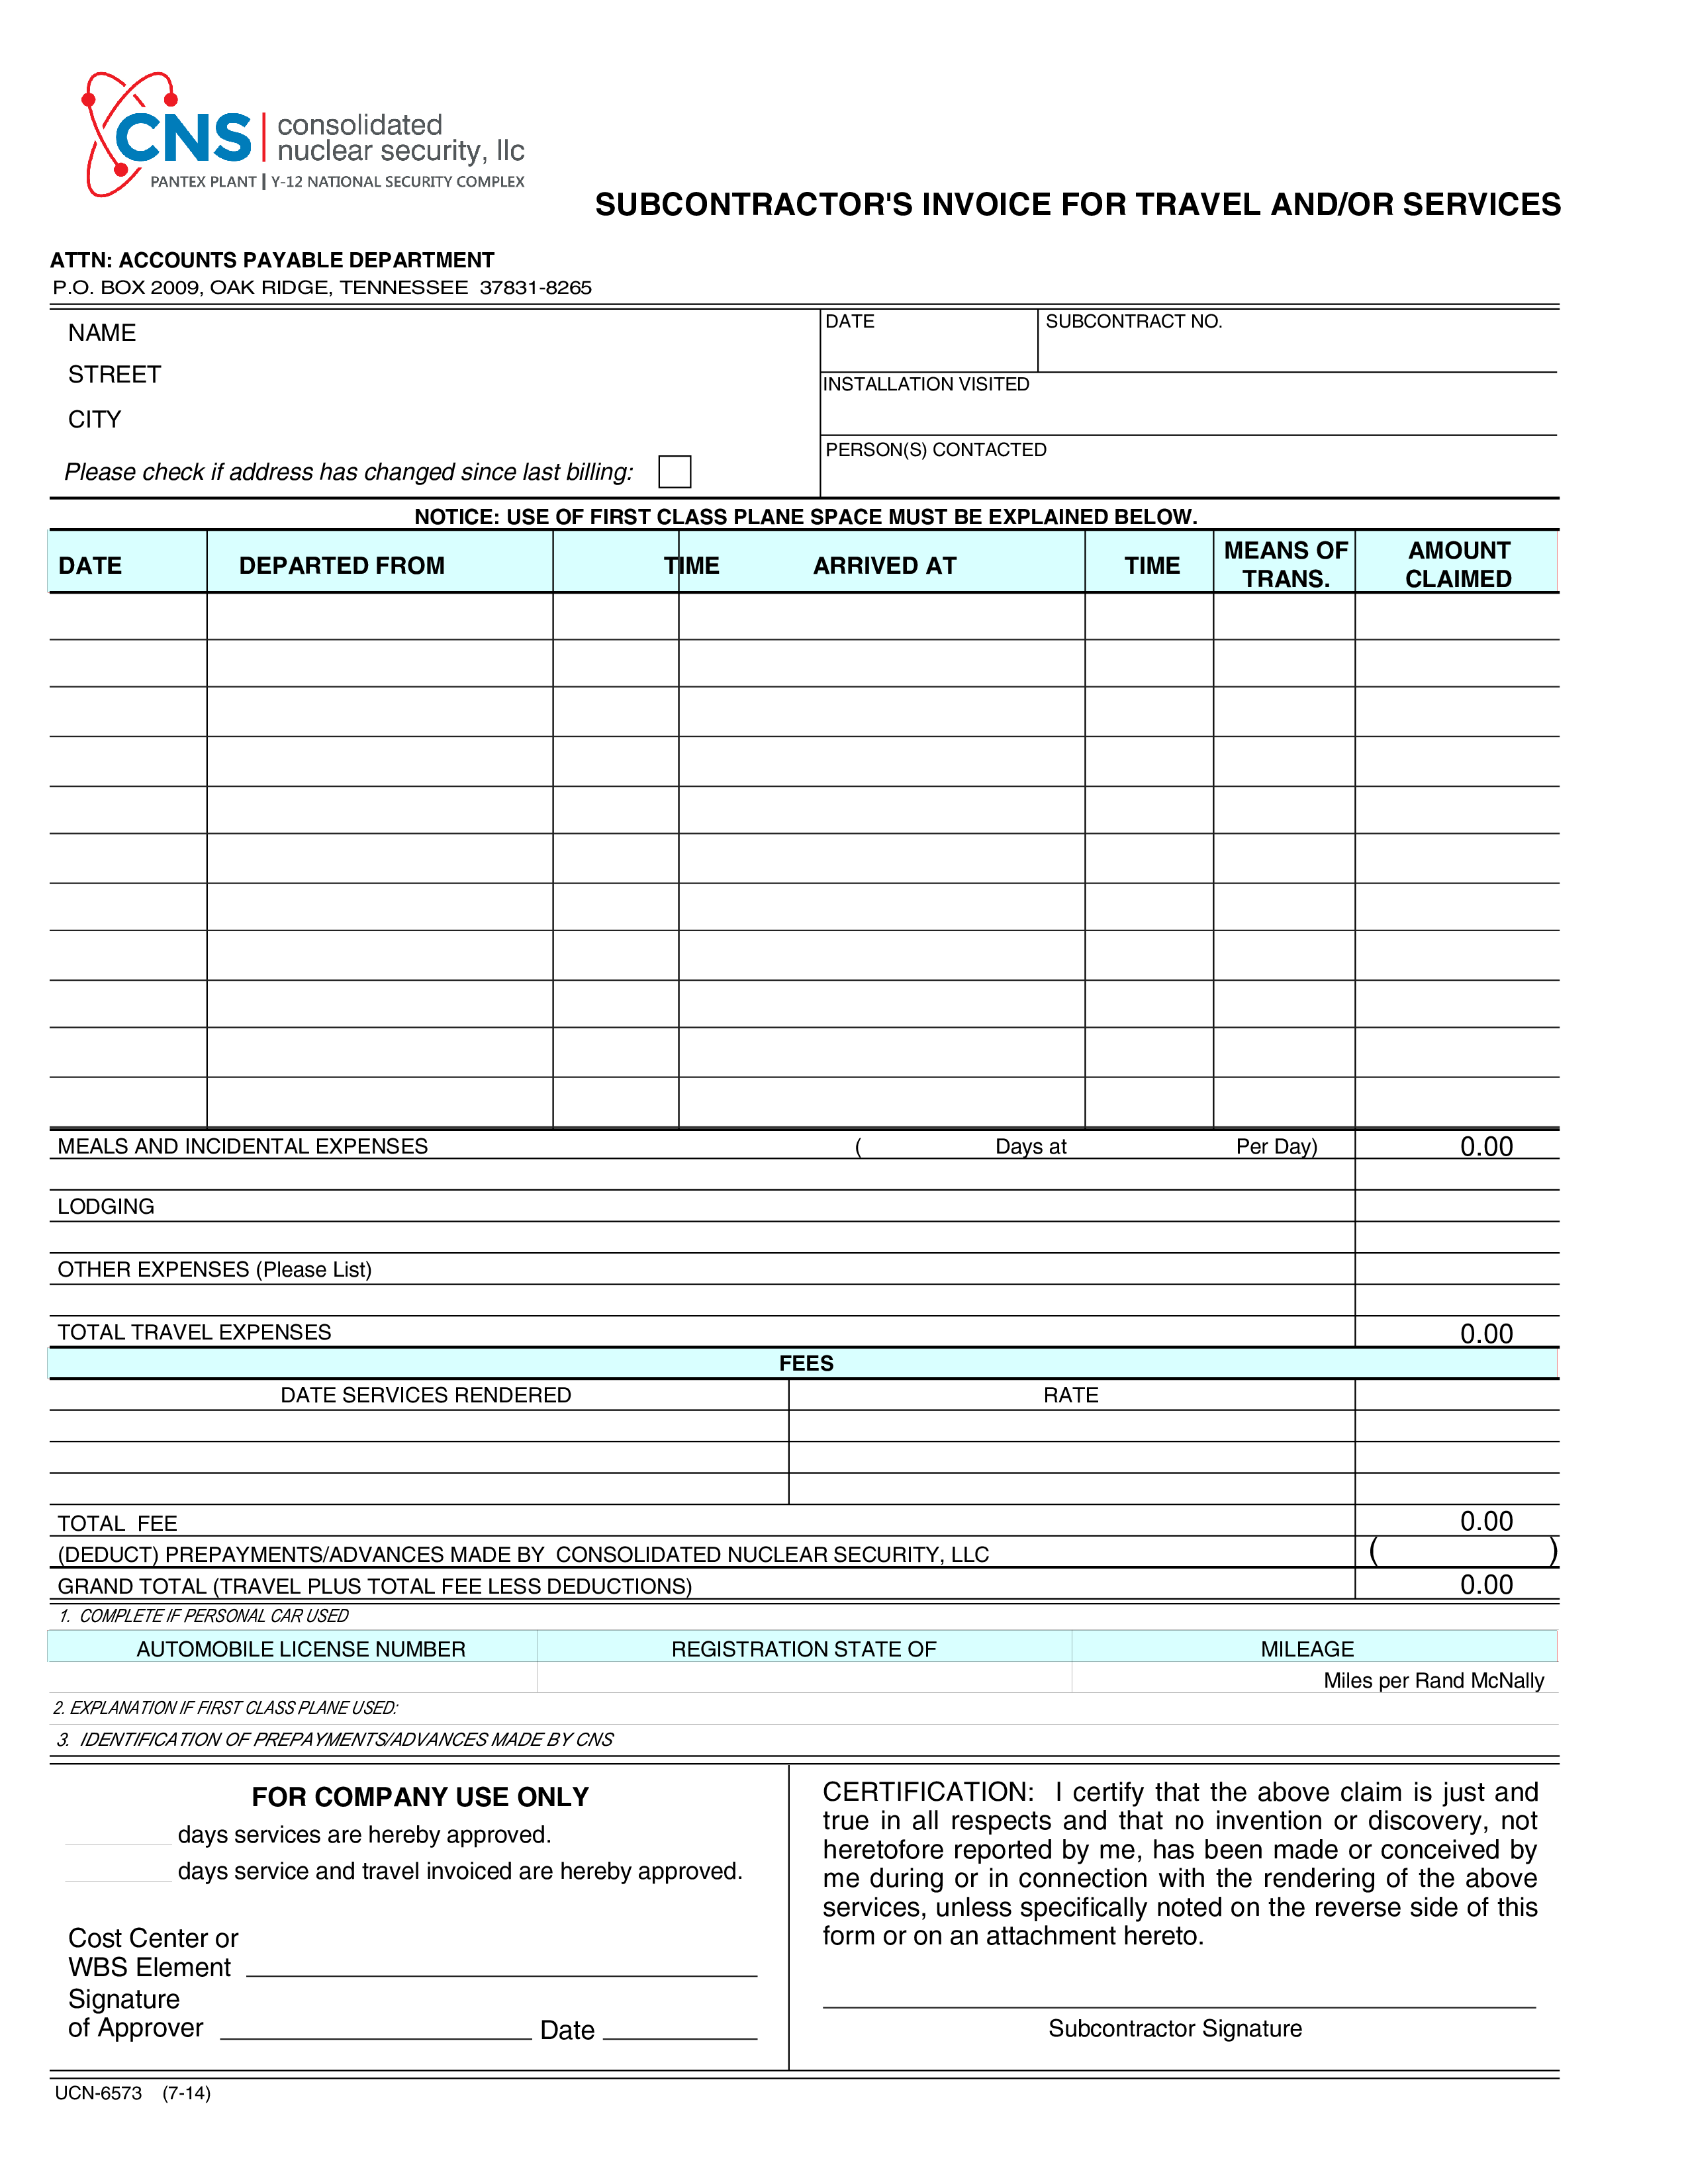 subcontractor invoice for travel and/or services template